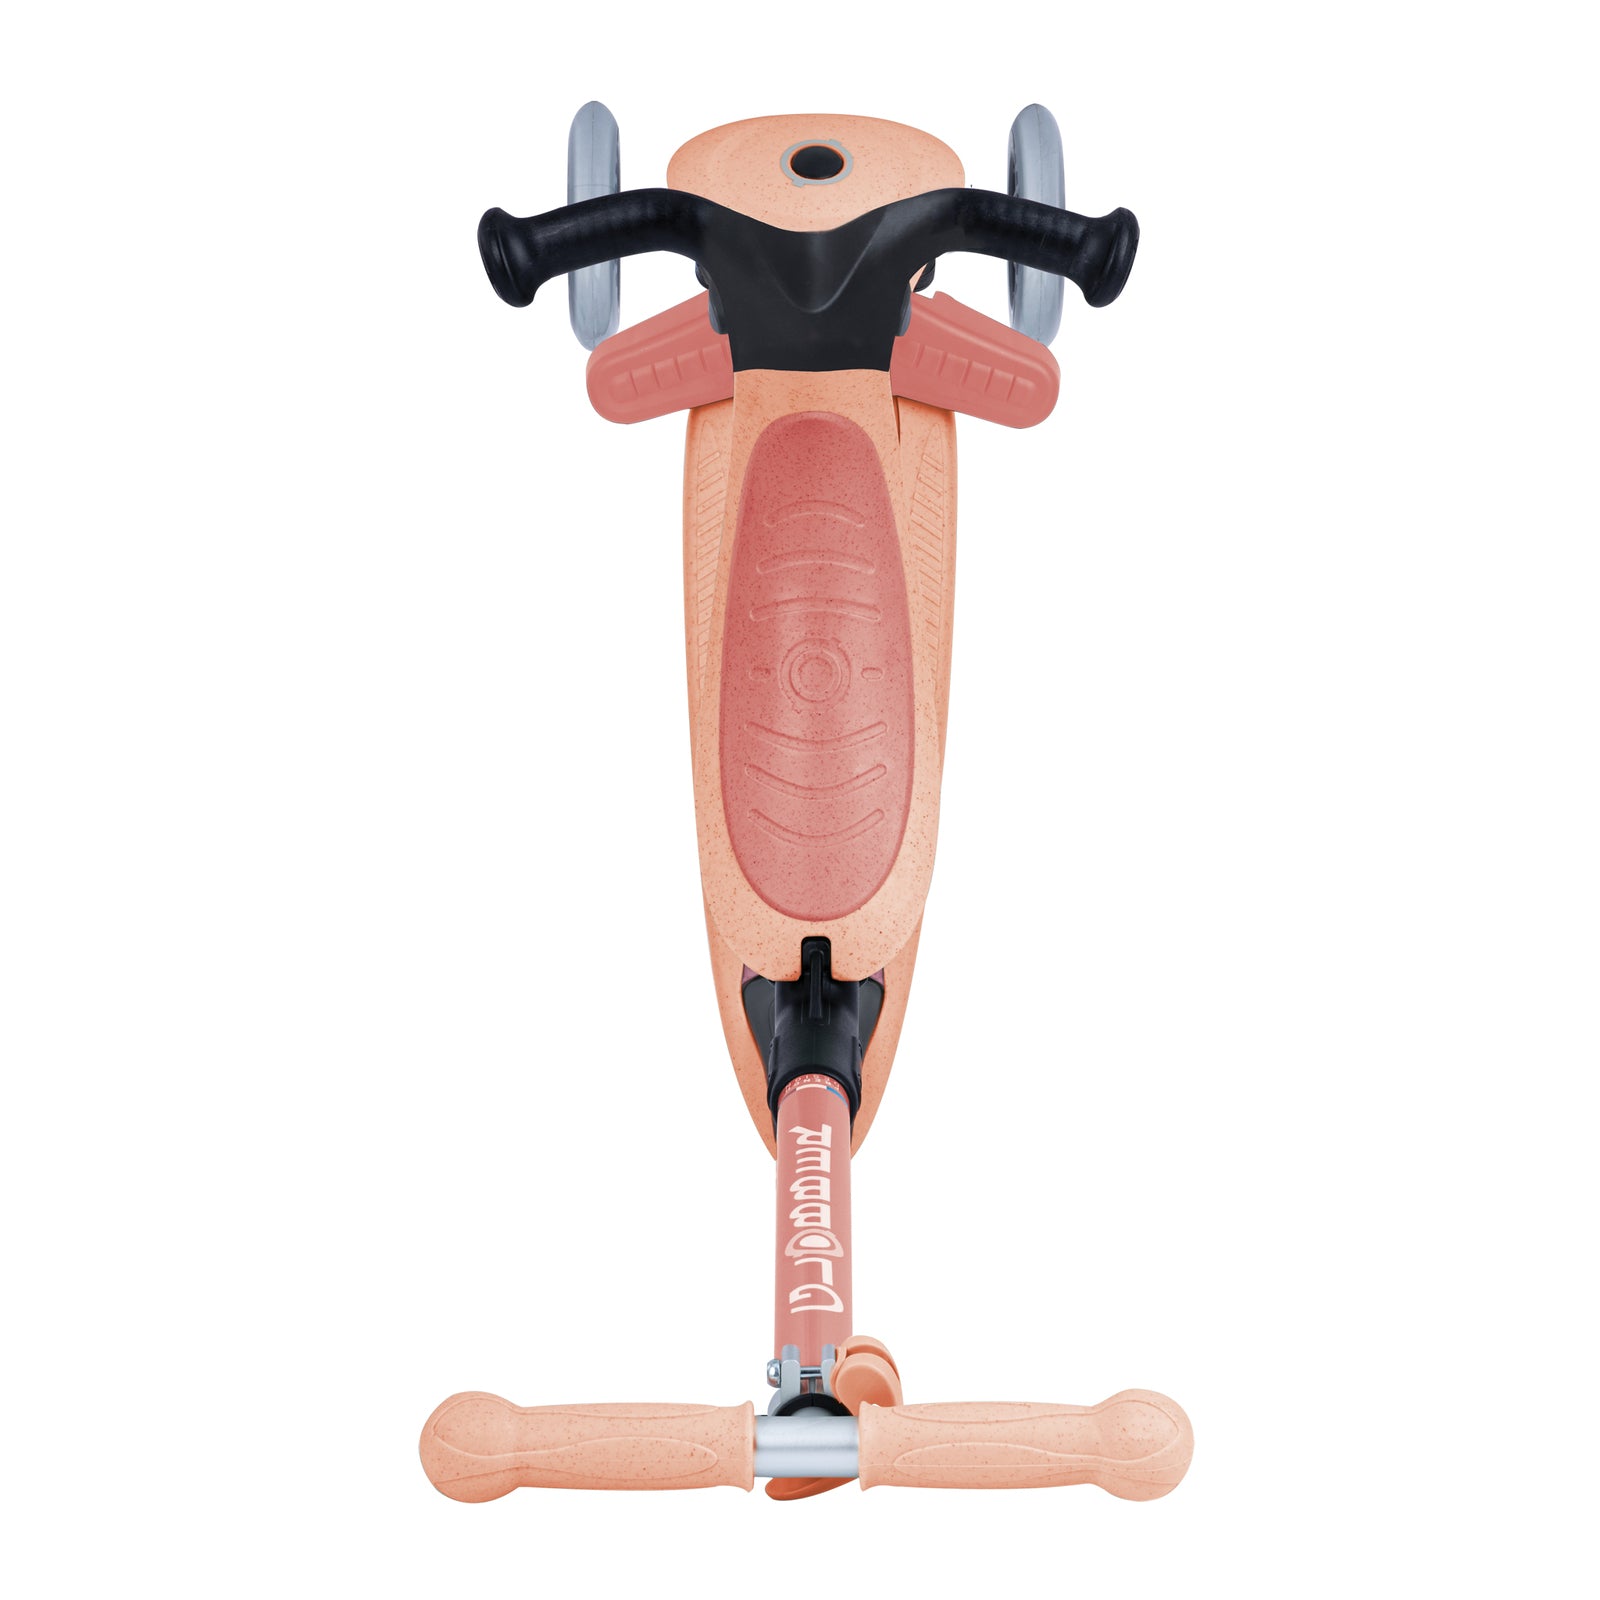 Globber Ecologic Go Up Foldable Plus Convertible Scooter - Peach